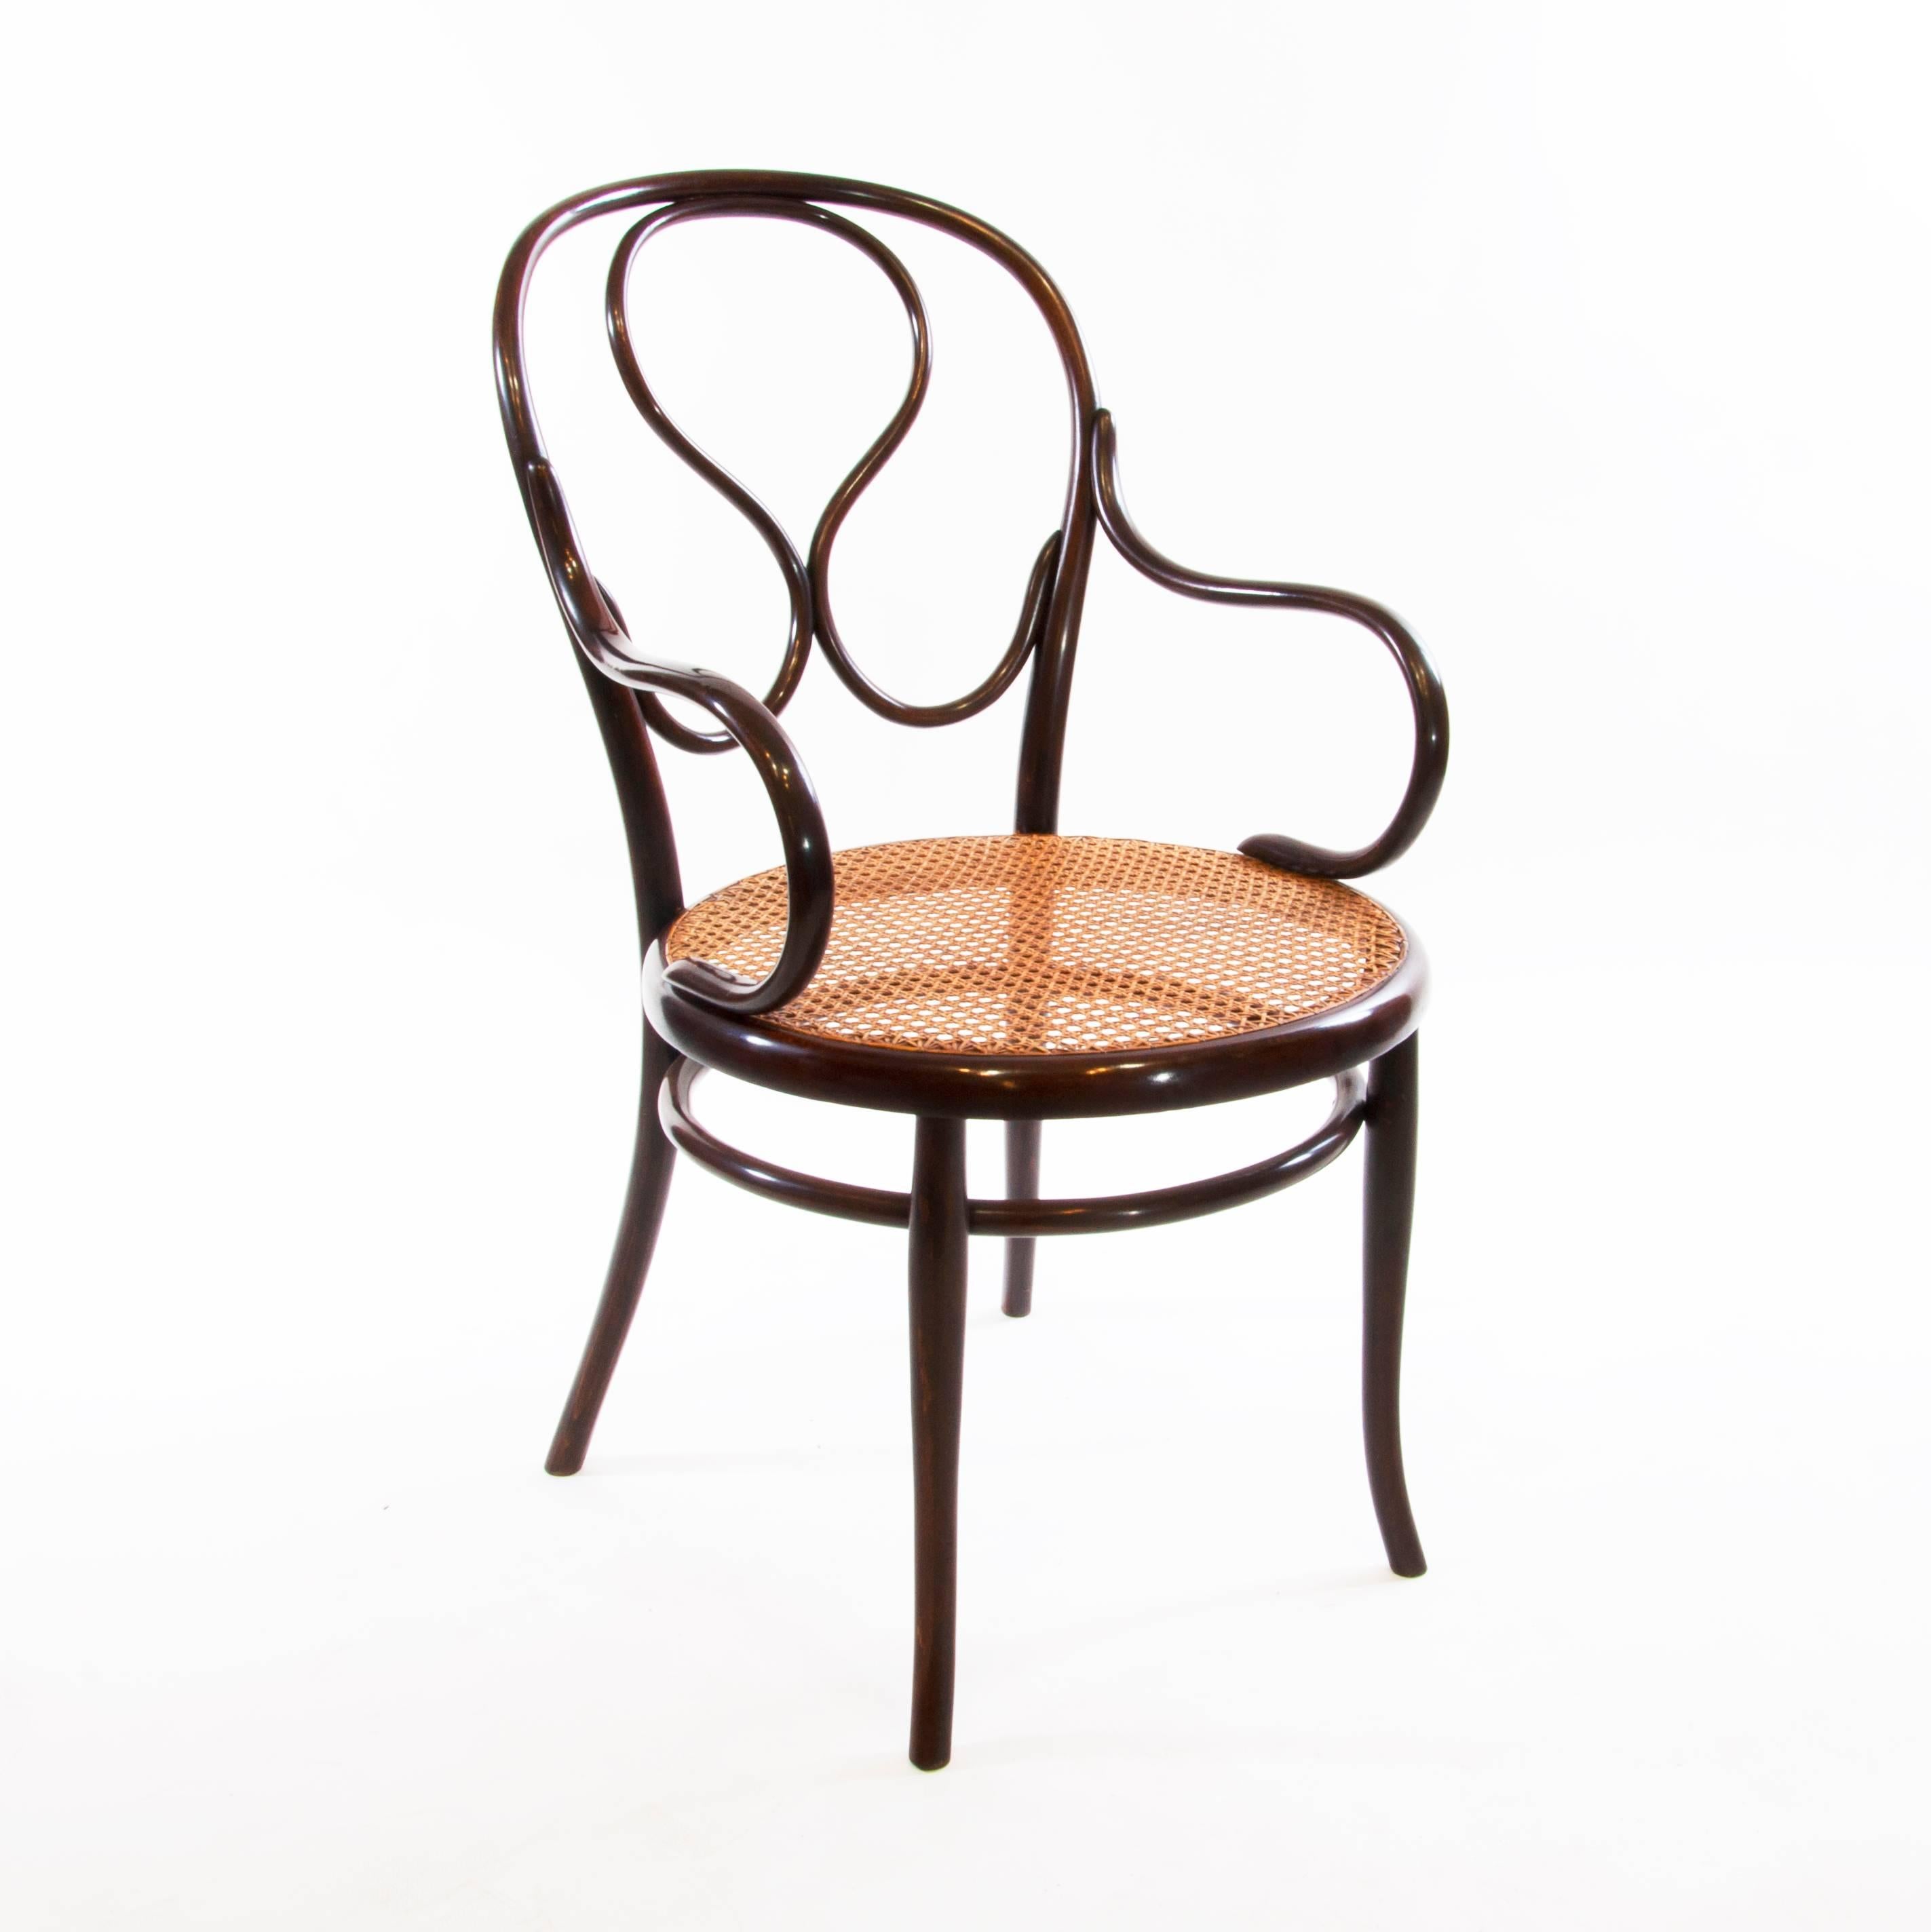 19th Century Antique Thonet Bentwood Armchair Fauteuil No. 20, circa 1900 For Sale